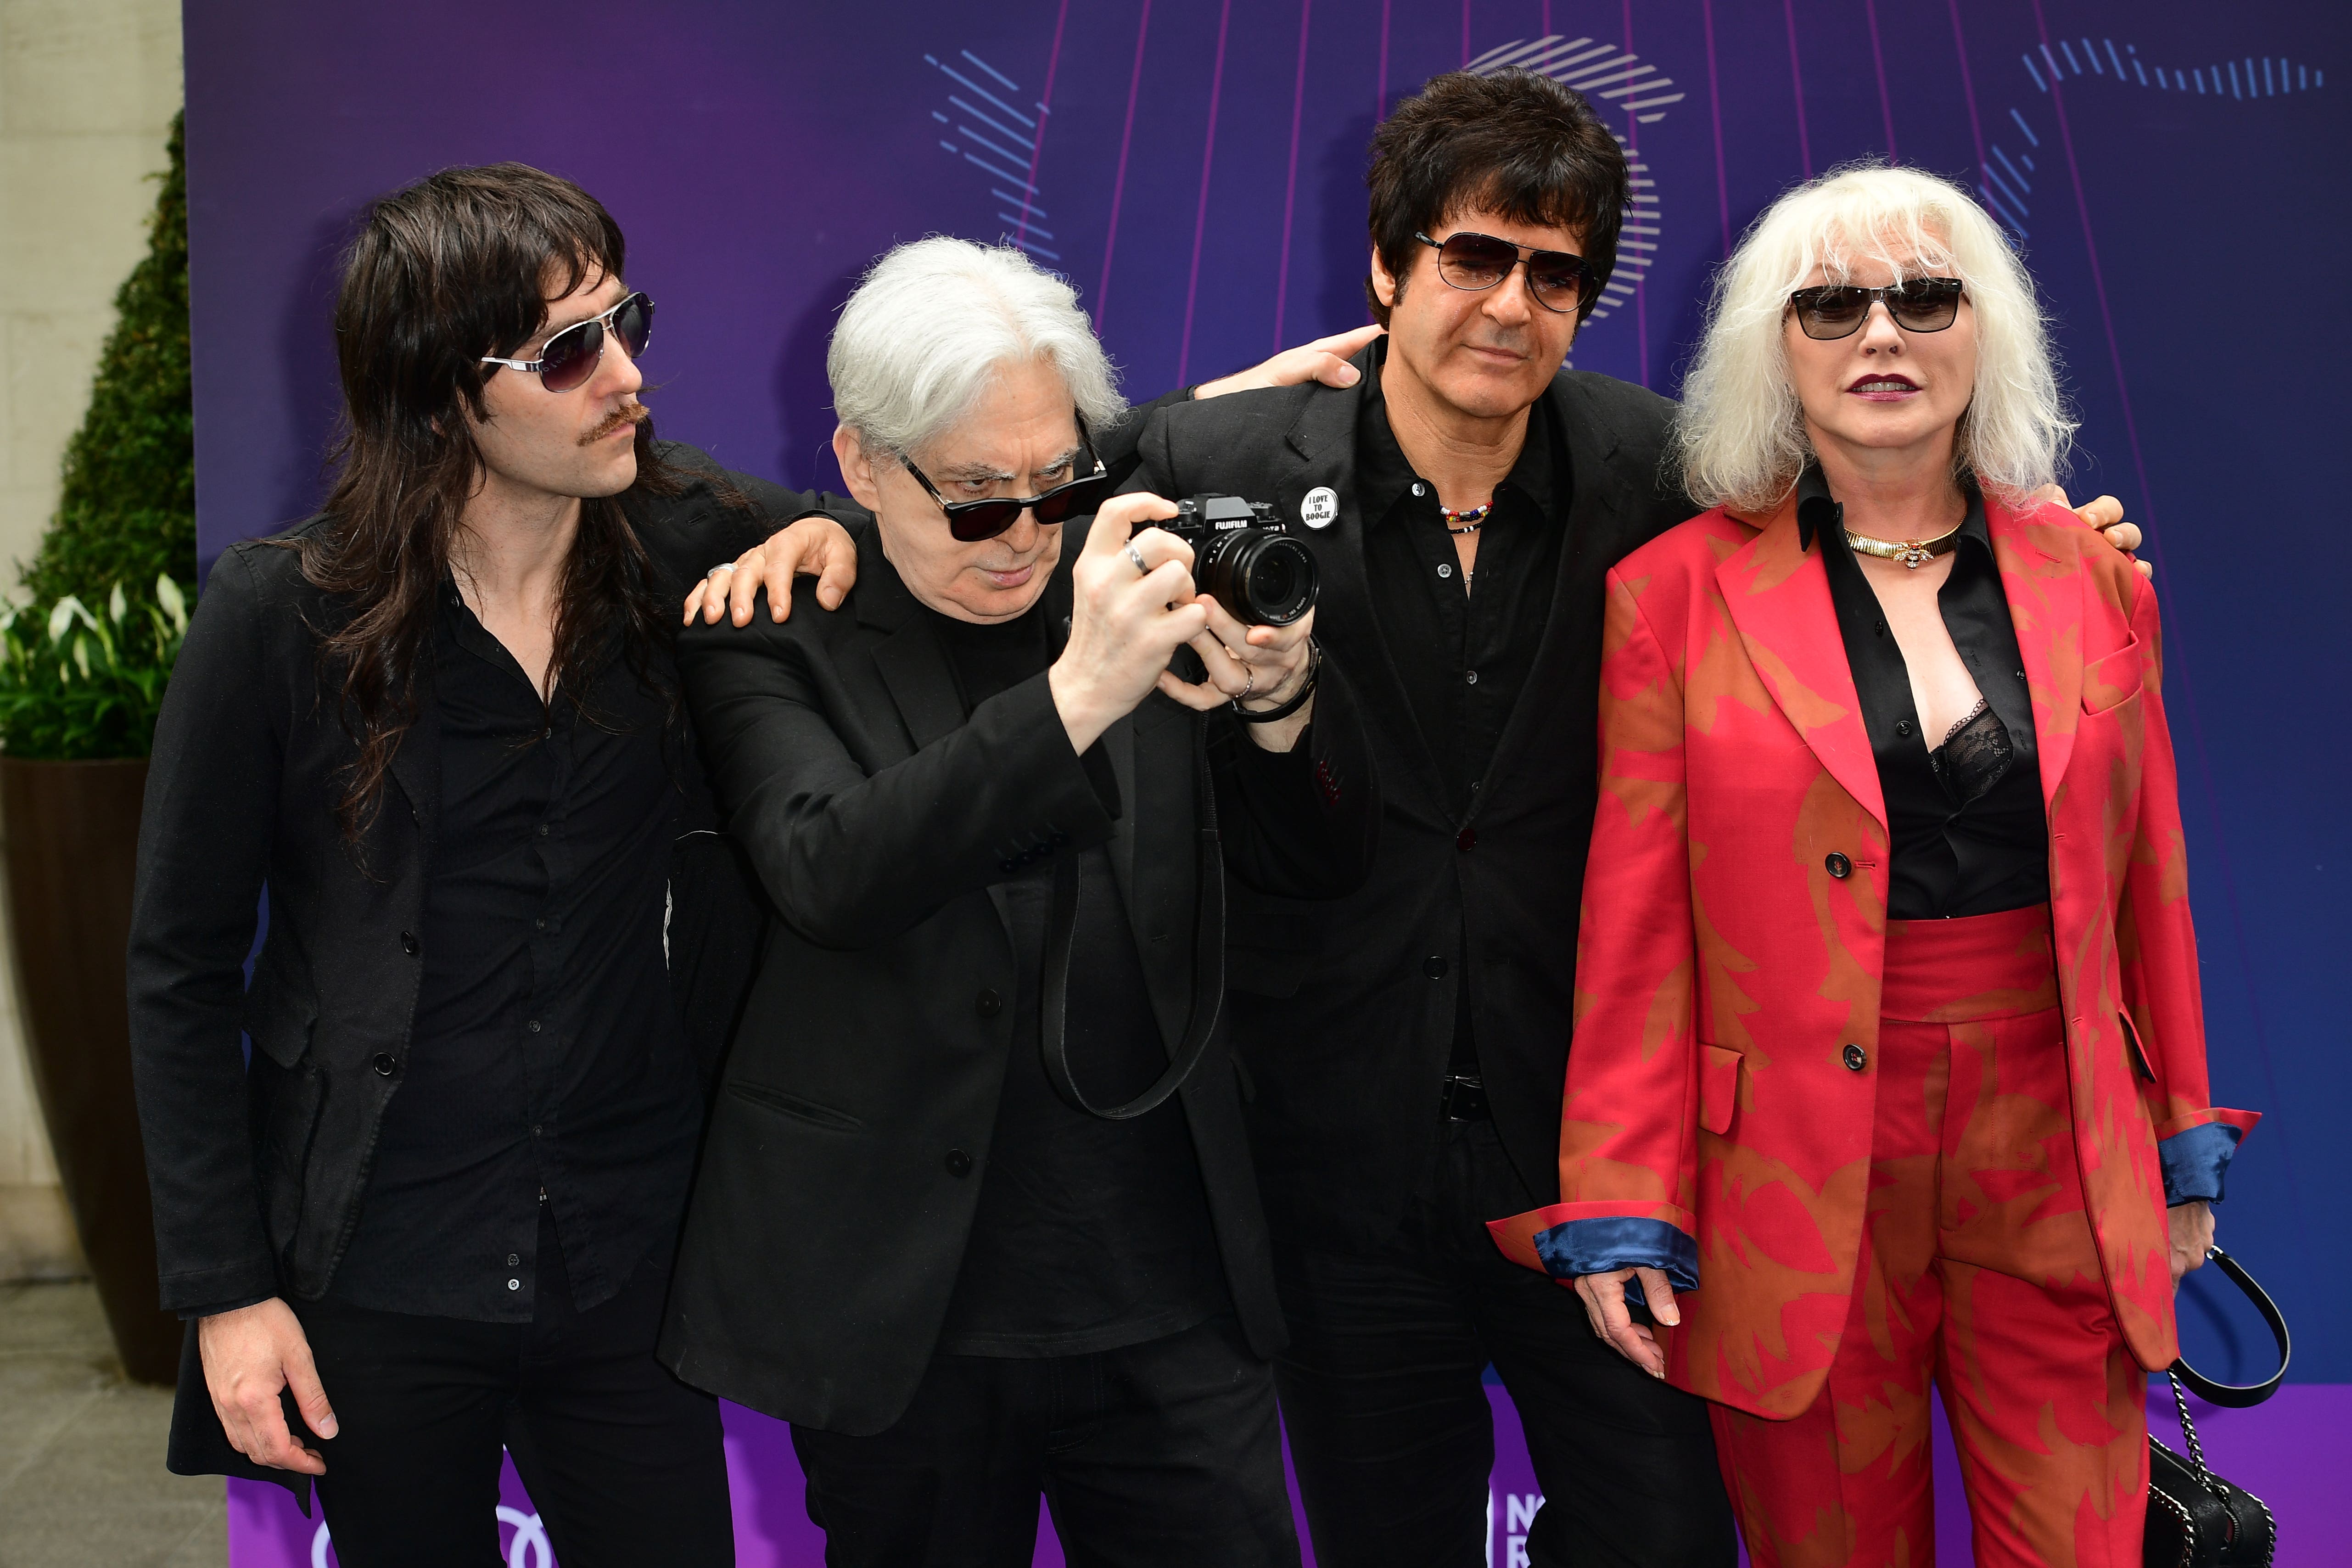 Clem Burke, second from right, with bandmates Matt Katz-Bohen, left, Chris Stein, second from left, and Debbie Harry (Ian West/PA)